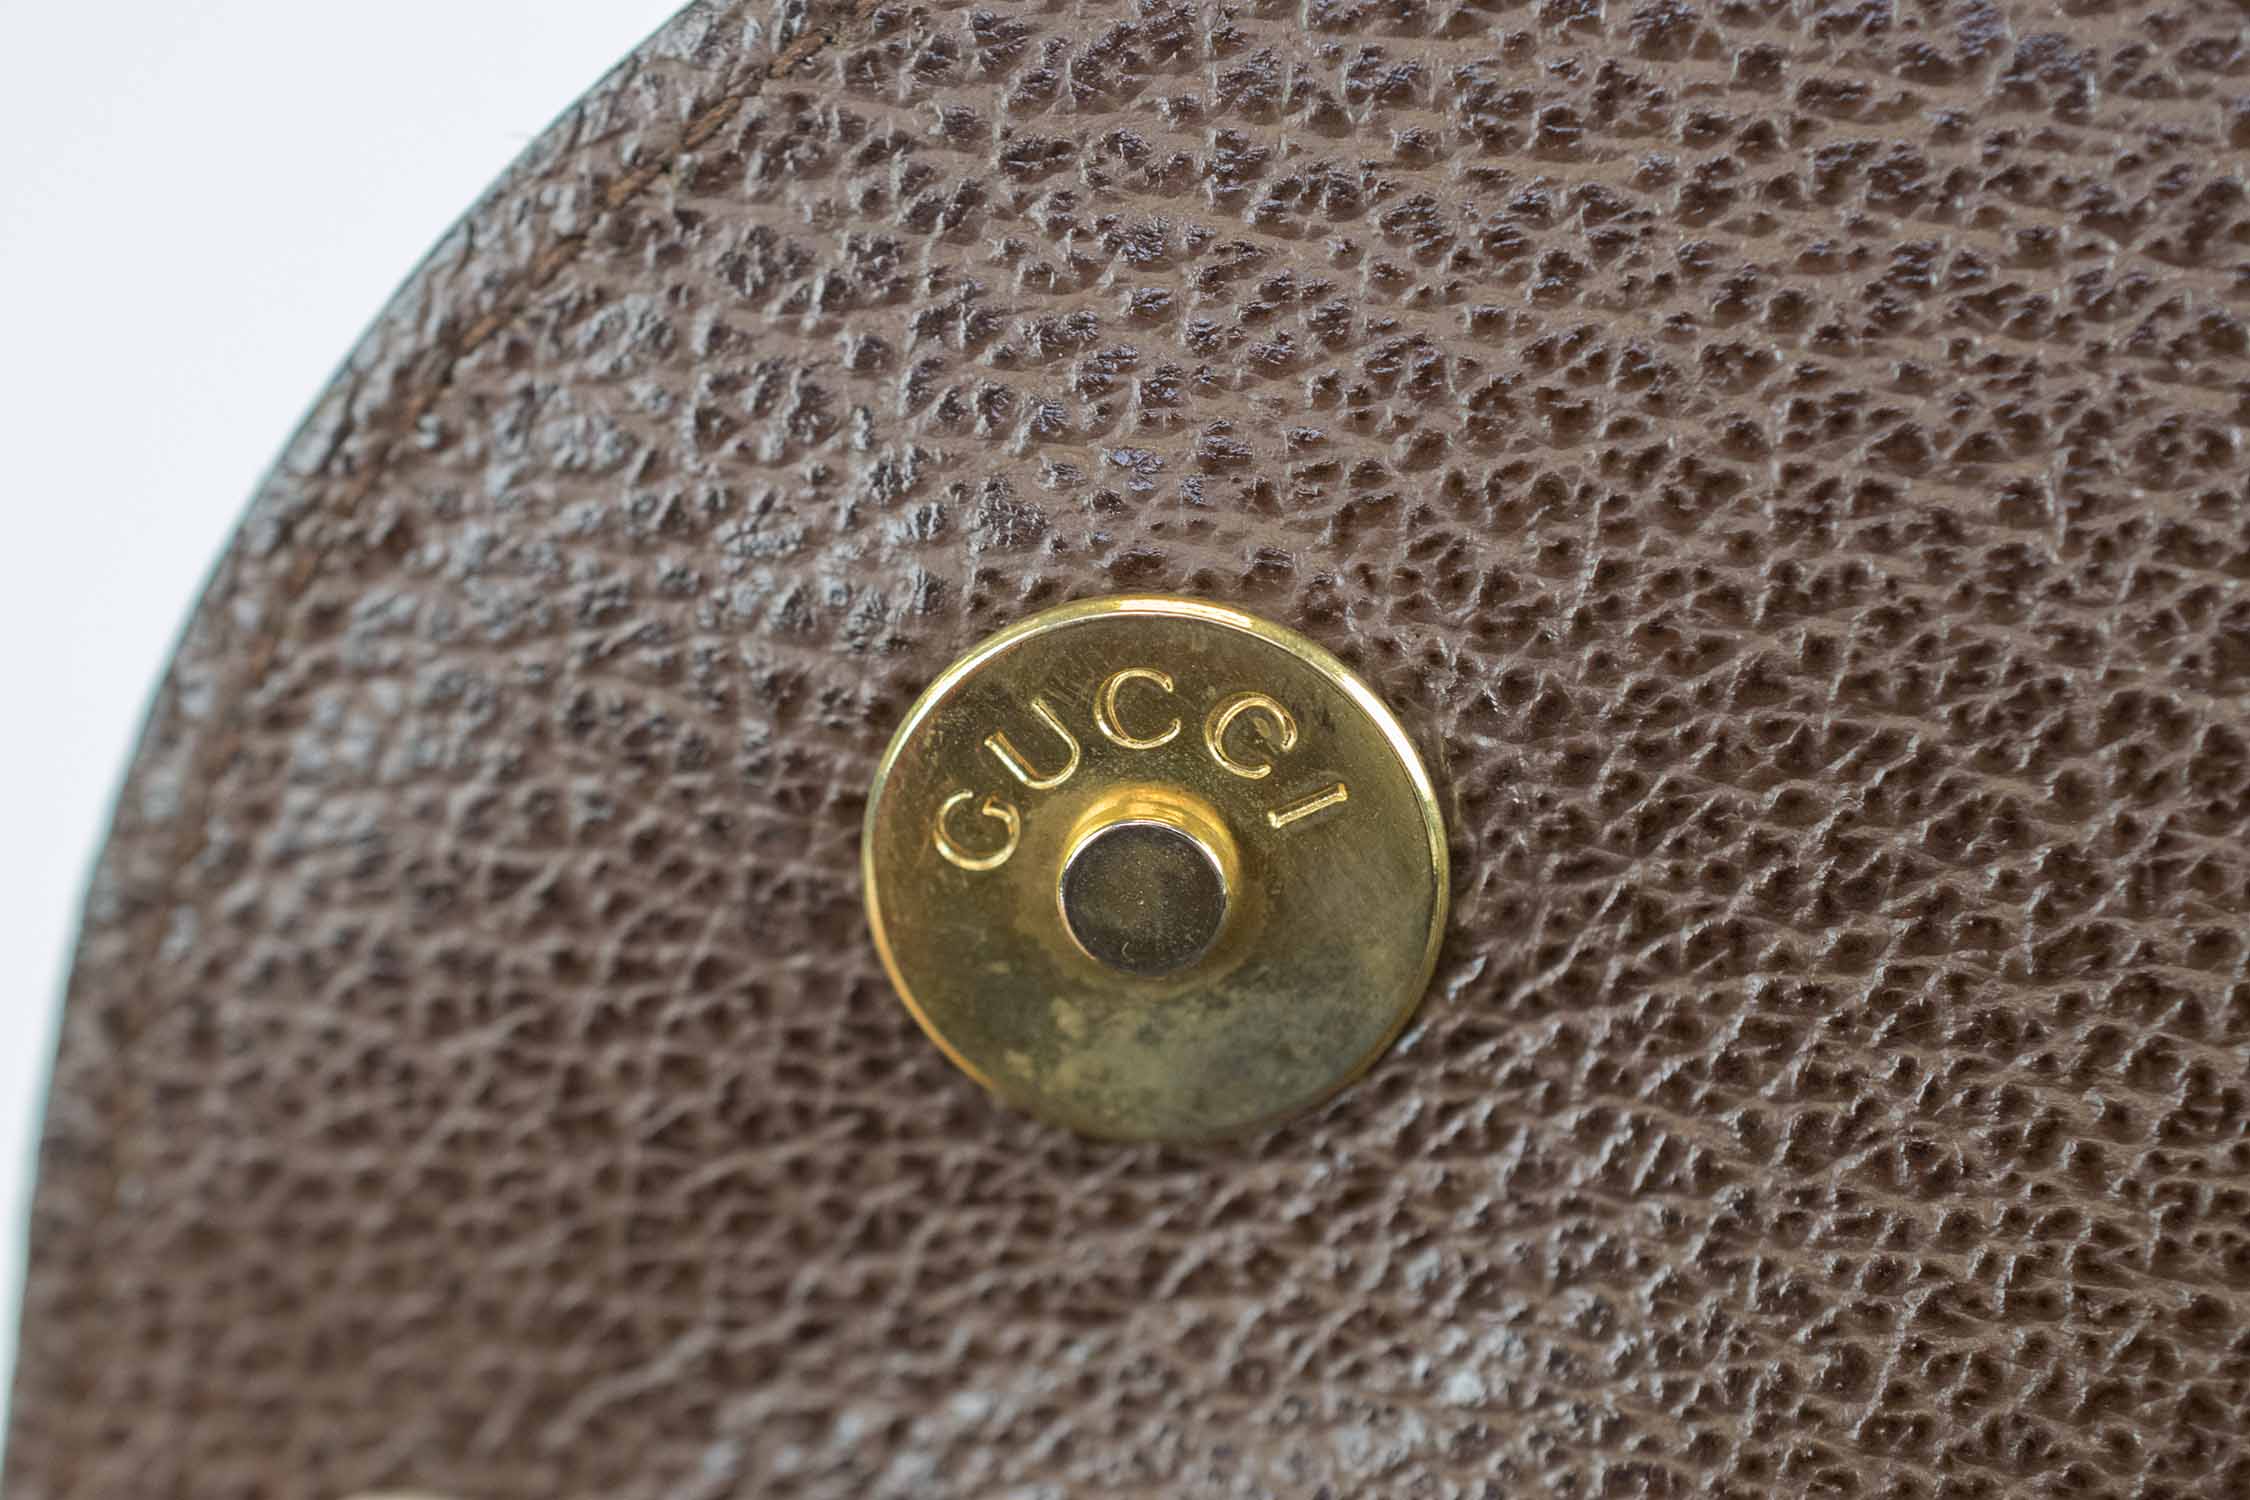 80s Vintage Gucci brown toiletary clutch pouch with all over